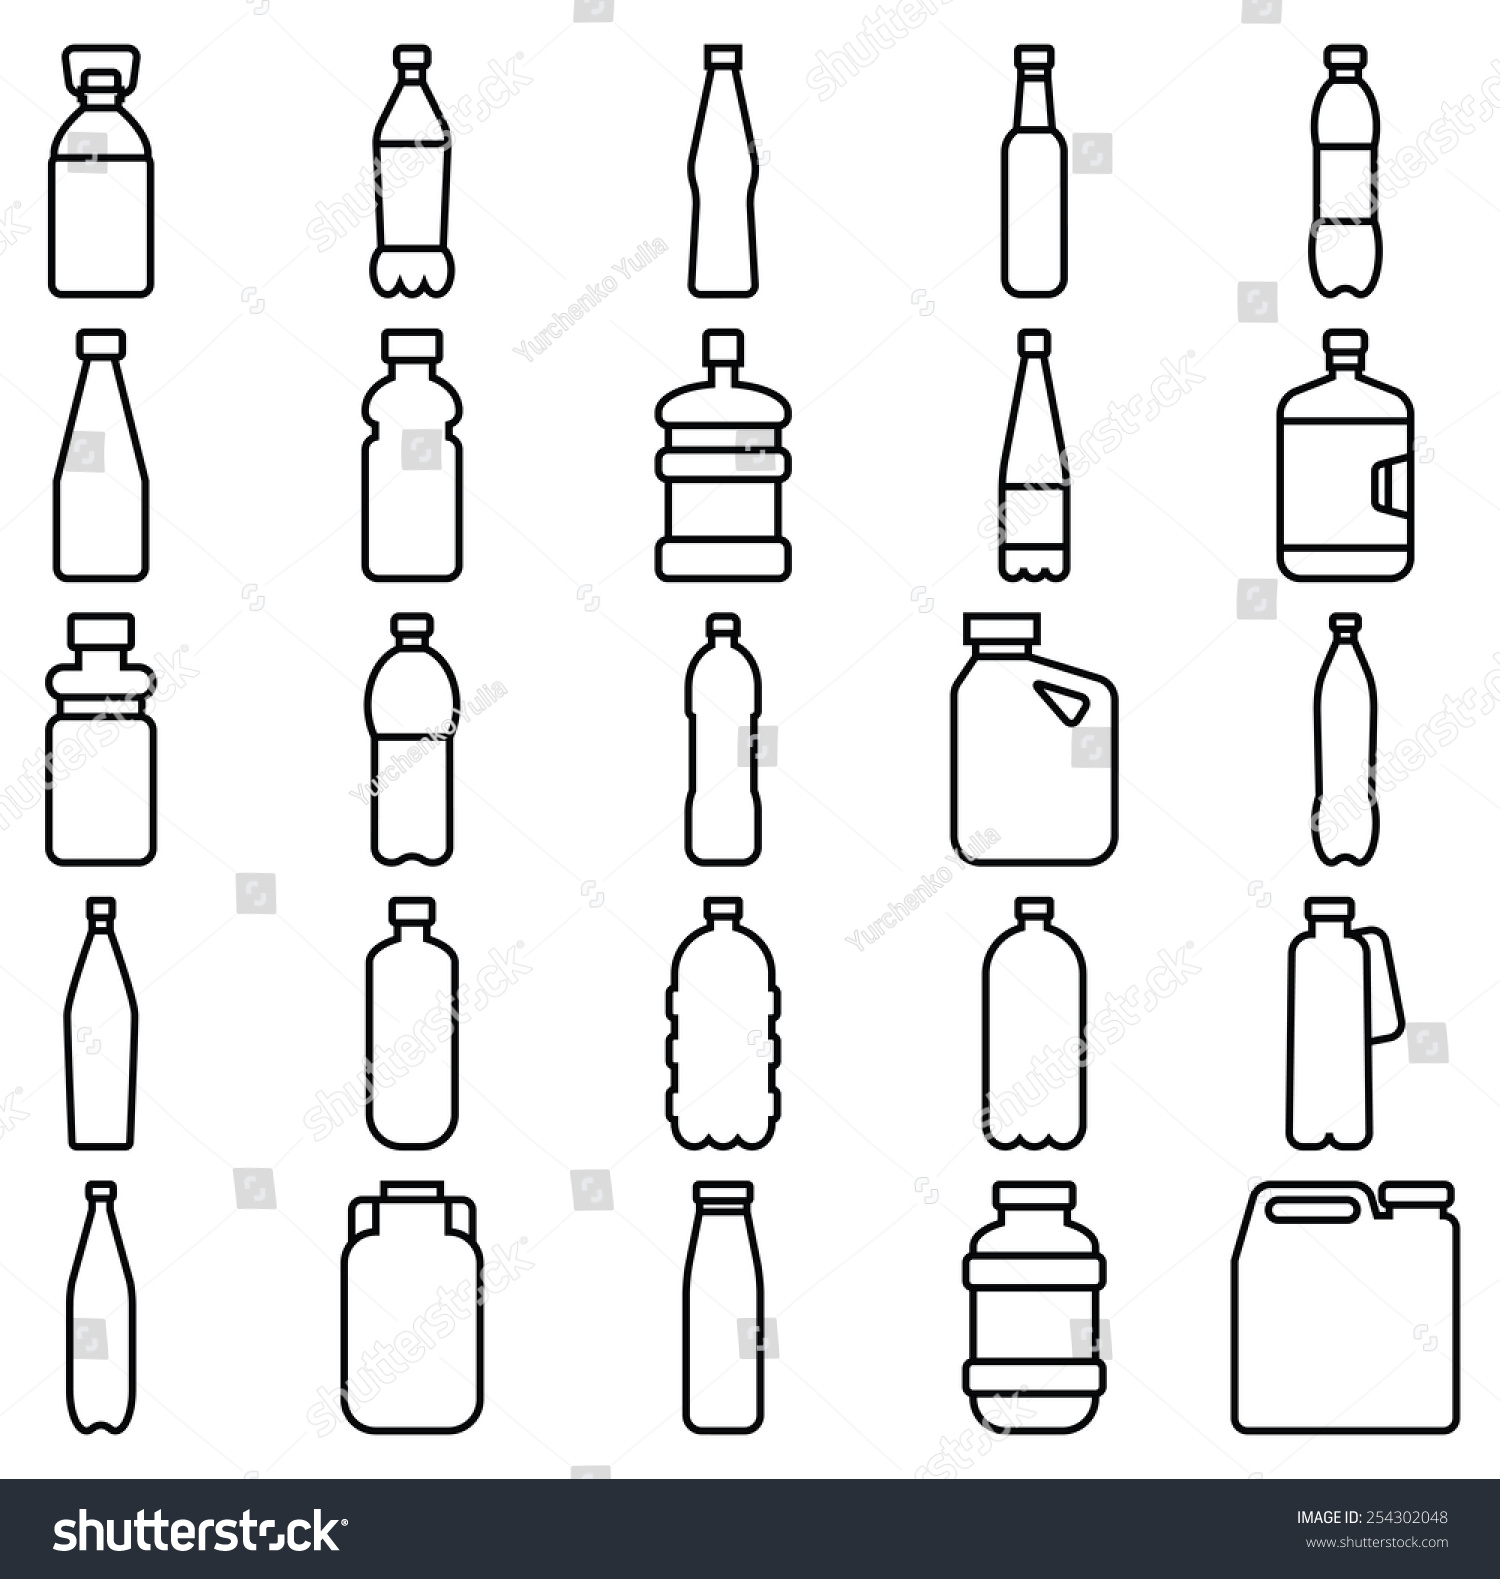 Stock Vector Illustration Of A Set Of Plastic Bottles And Other ...